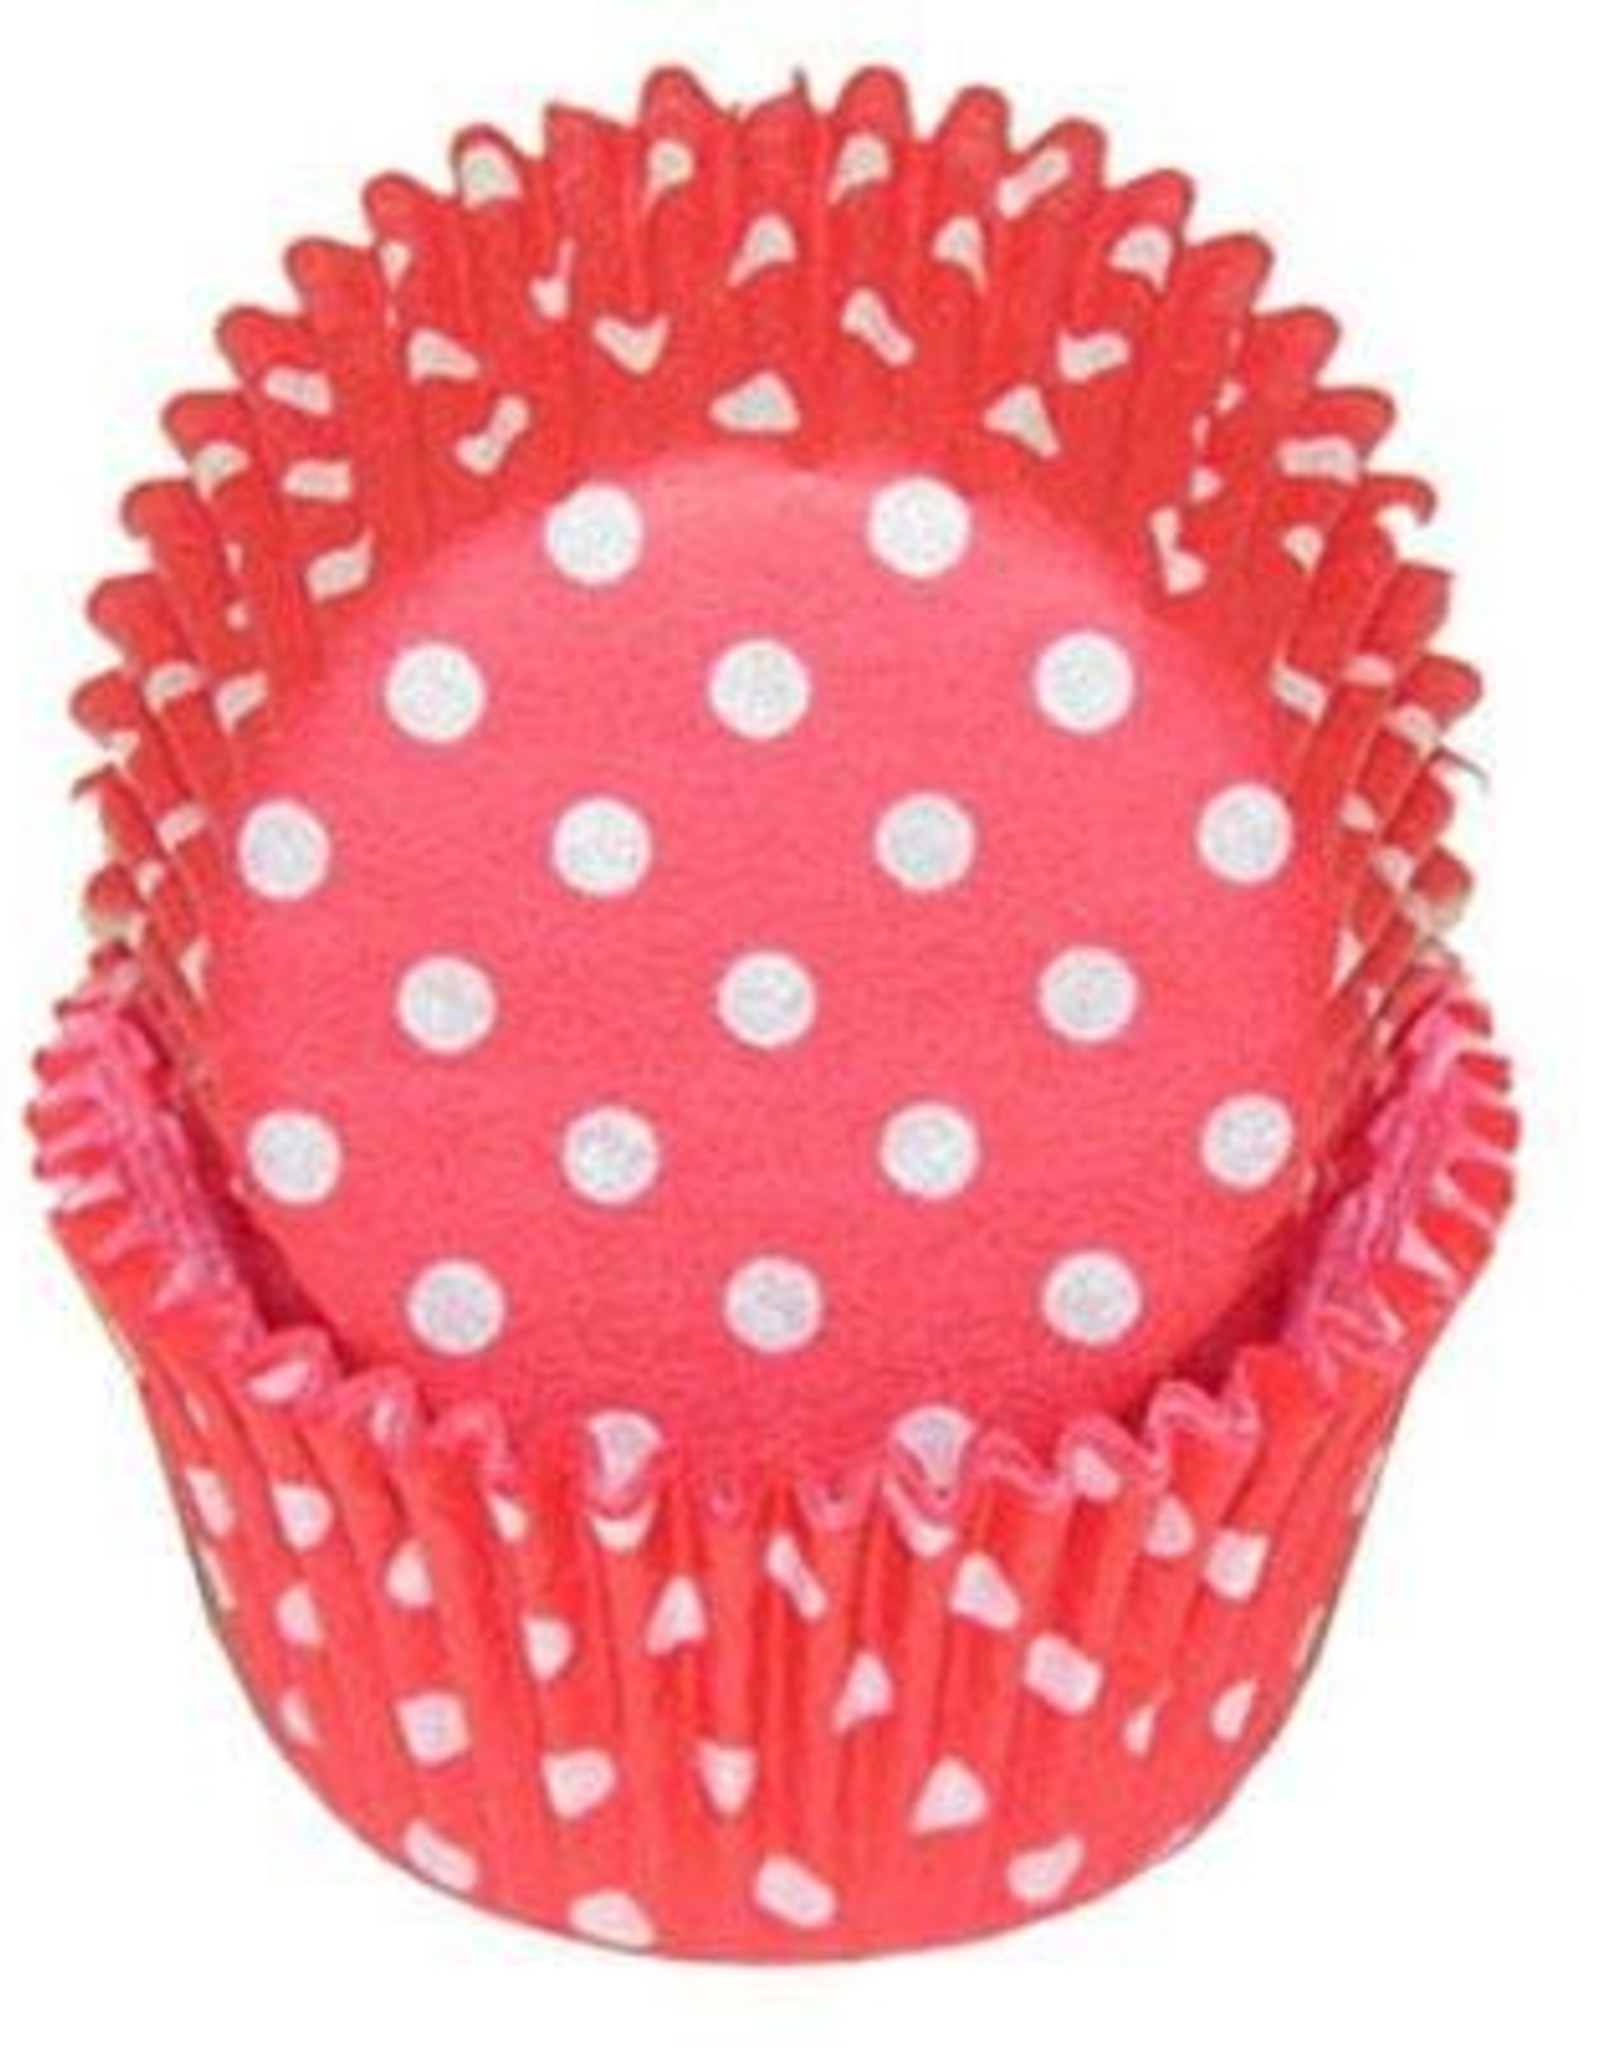 Red Polka Dot Baking Cups(approx 30-35ct)